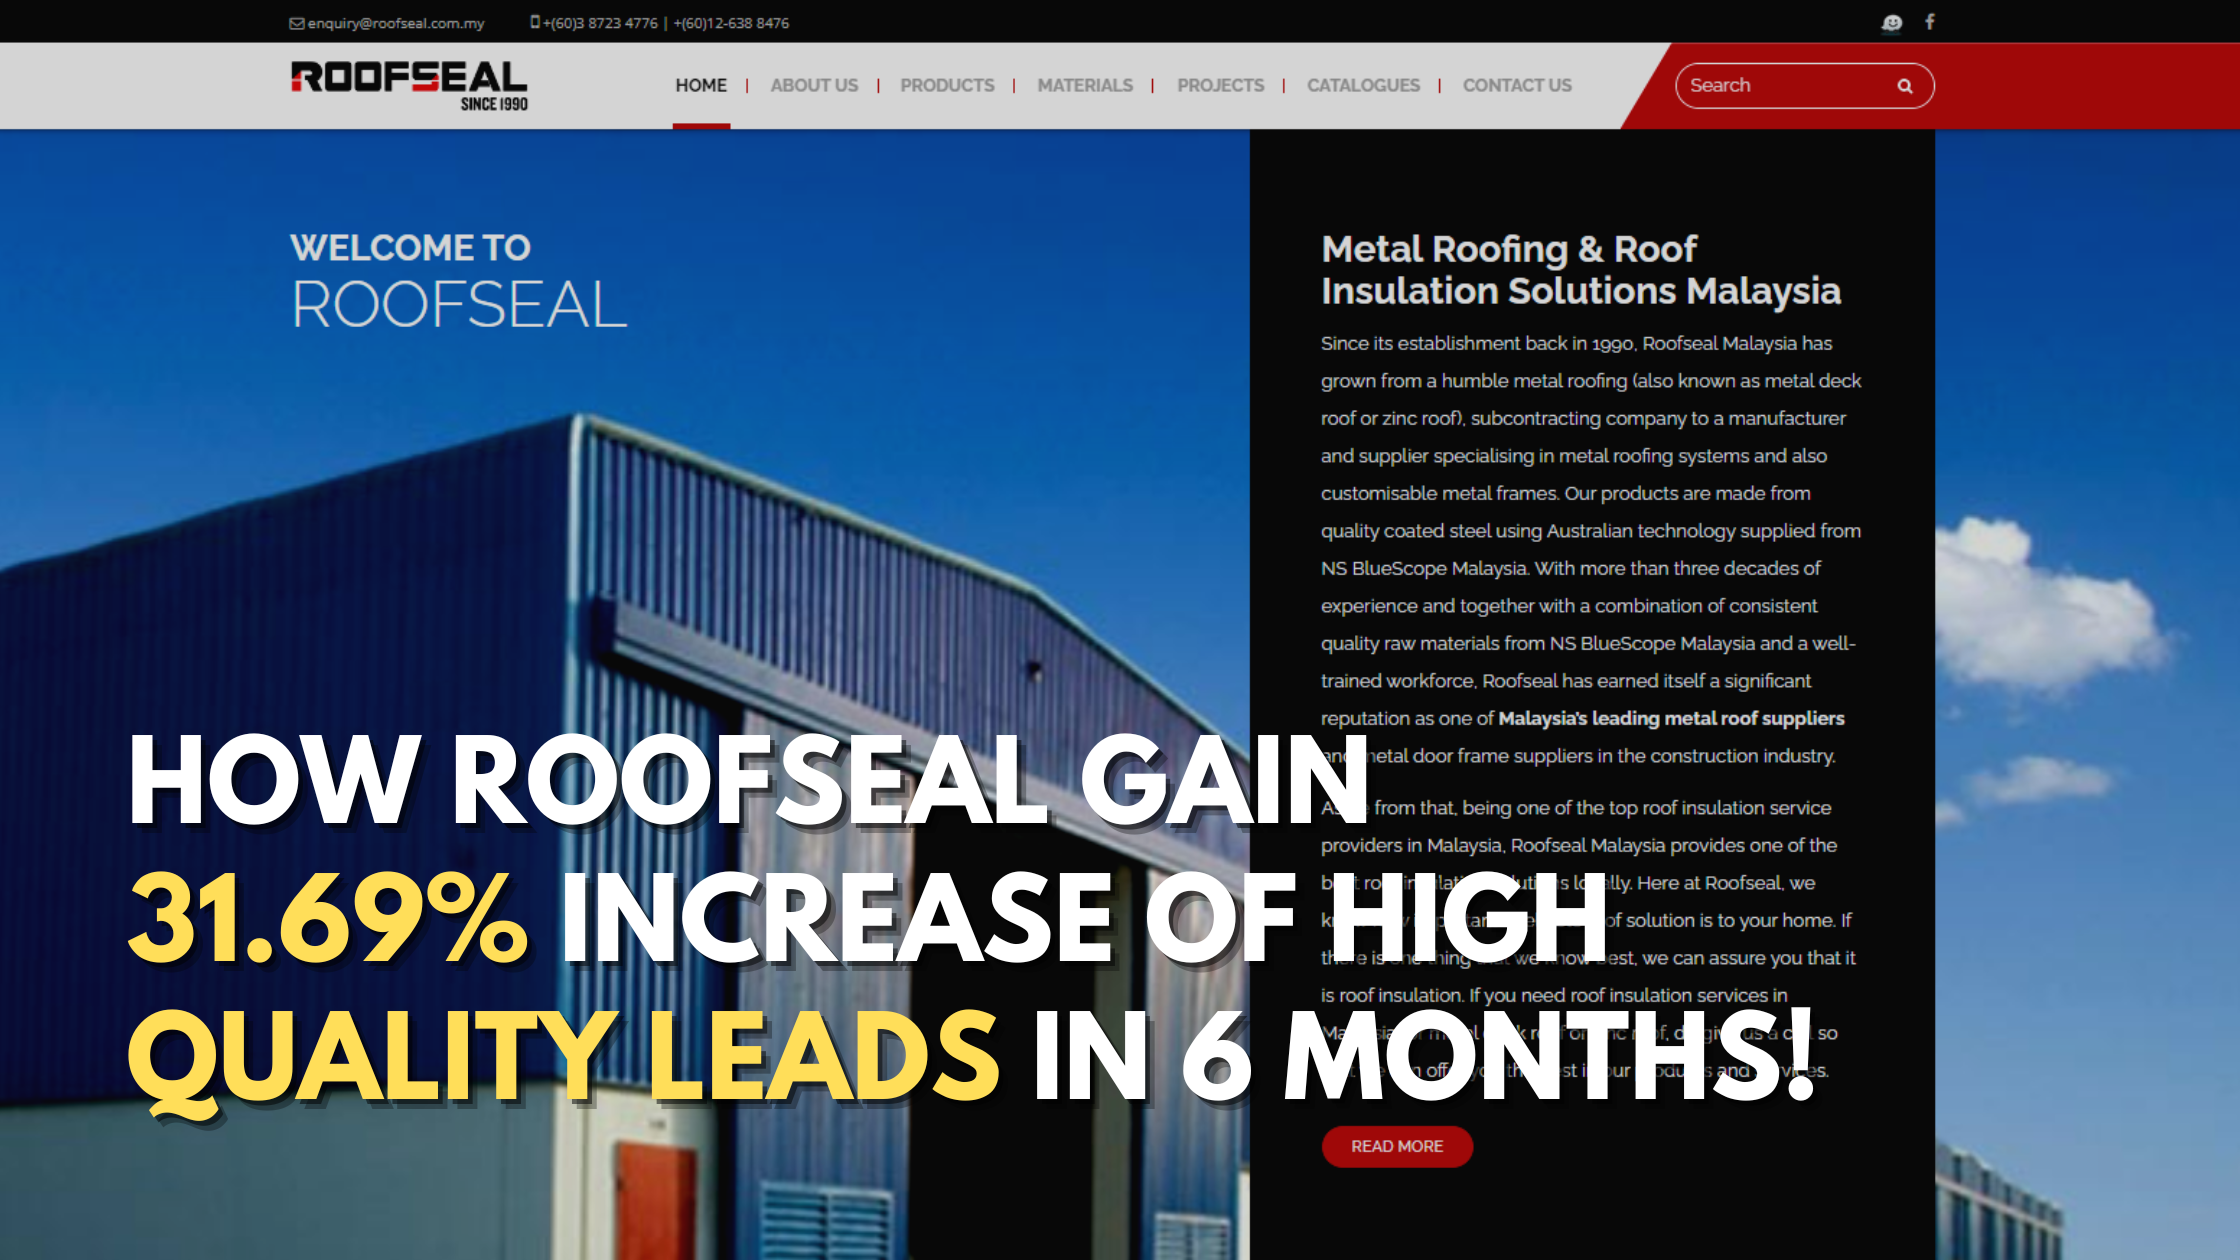 How Roofseal Gain 31.69% Increase of High Quality Leads In 6 Months!